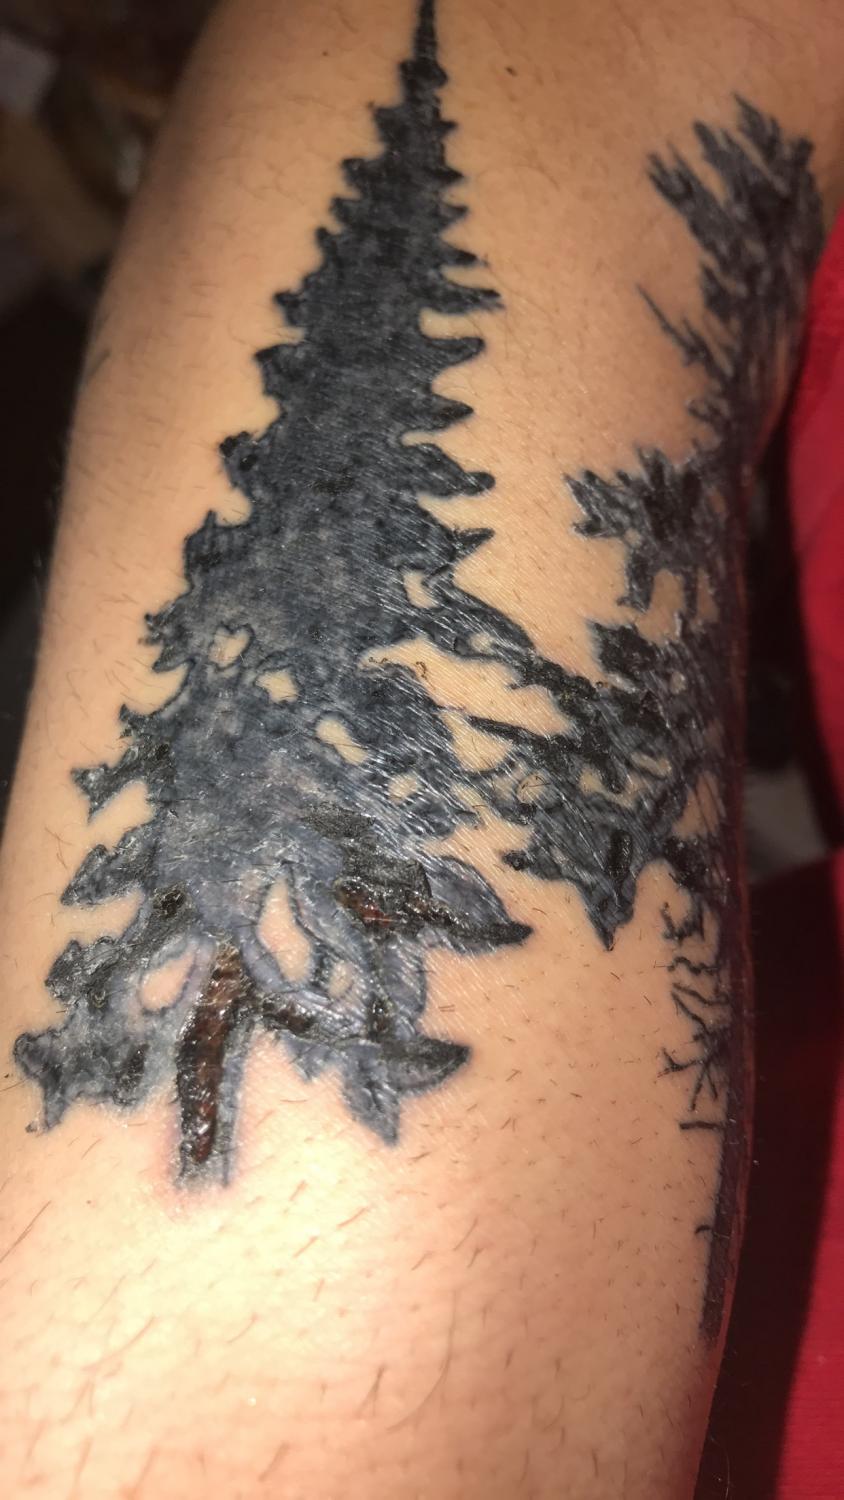 Deep scab normal or not? - Initiation - Last Sparrow Tattoo